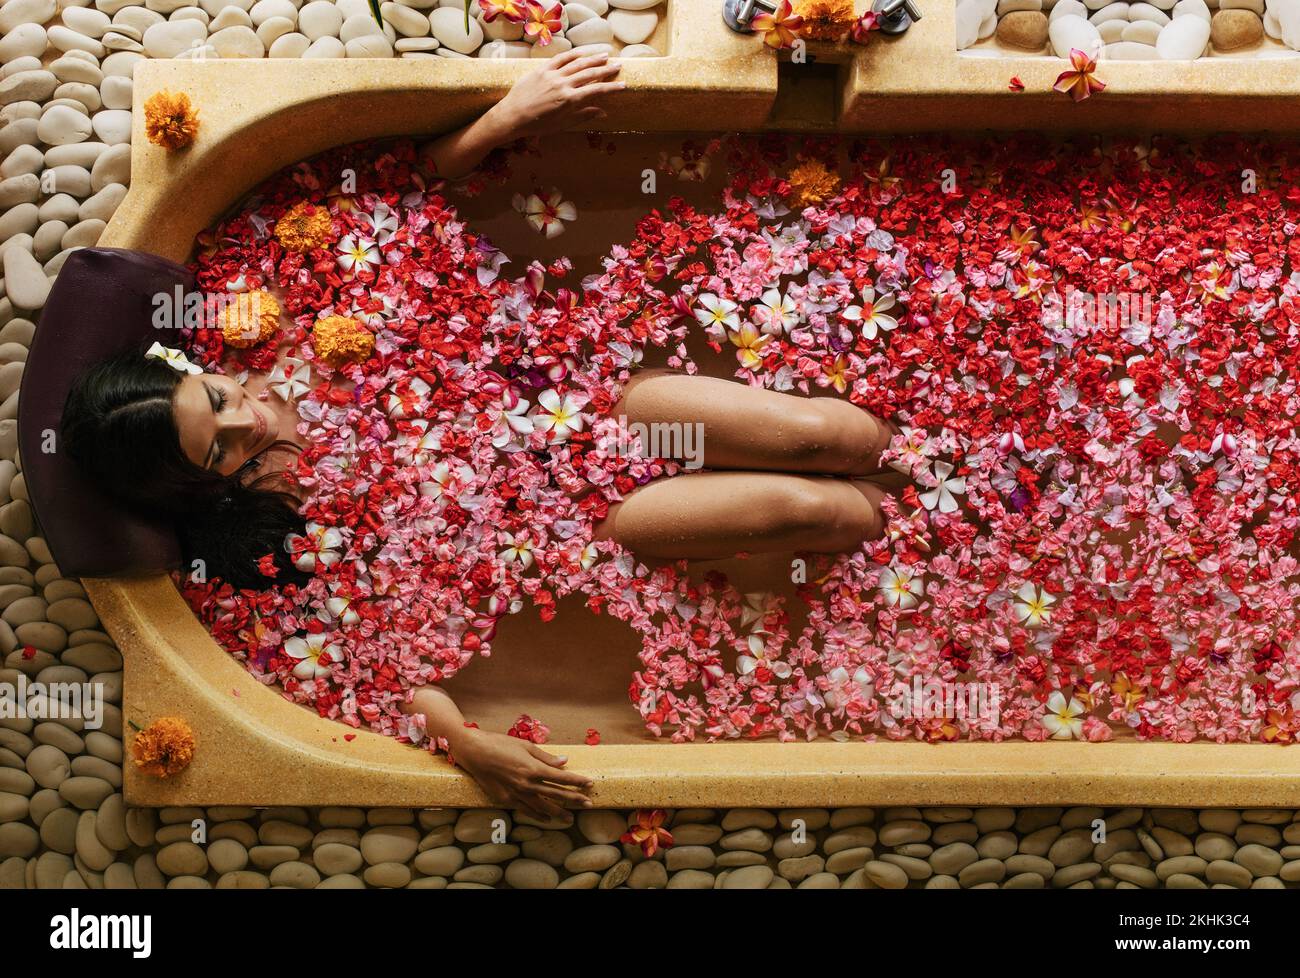 Top view of young woman lying in bath tub with flower petals. Female having flower bath at health spa. Stock Photo